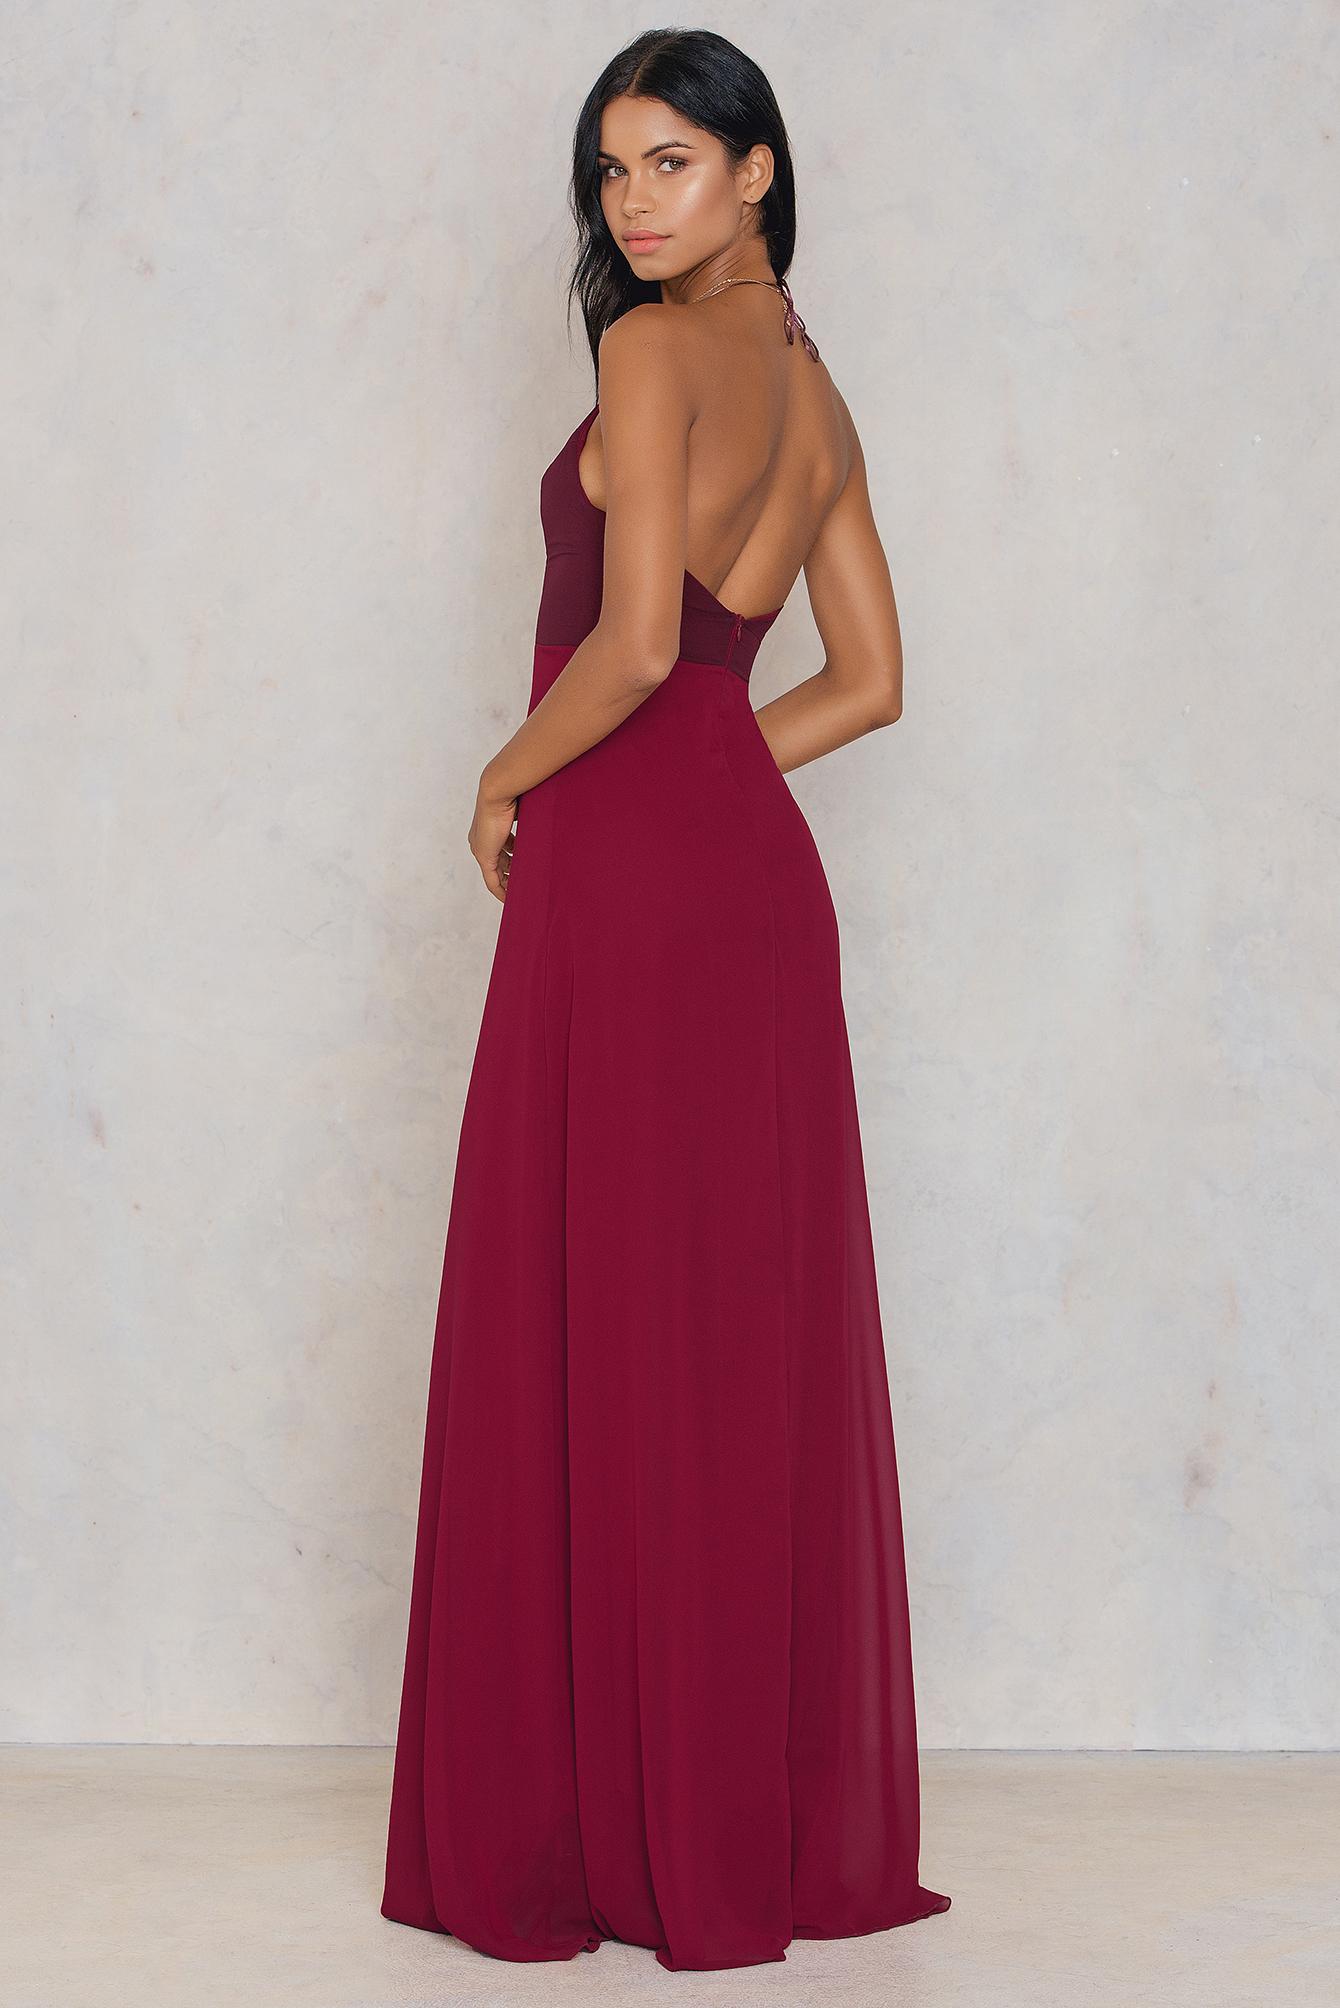 Trendyol Synthetic Thin Strap Maxi Dress in Burgundy (Red) - Lyst